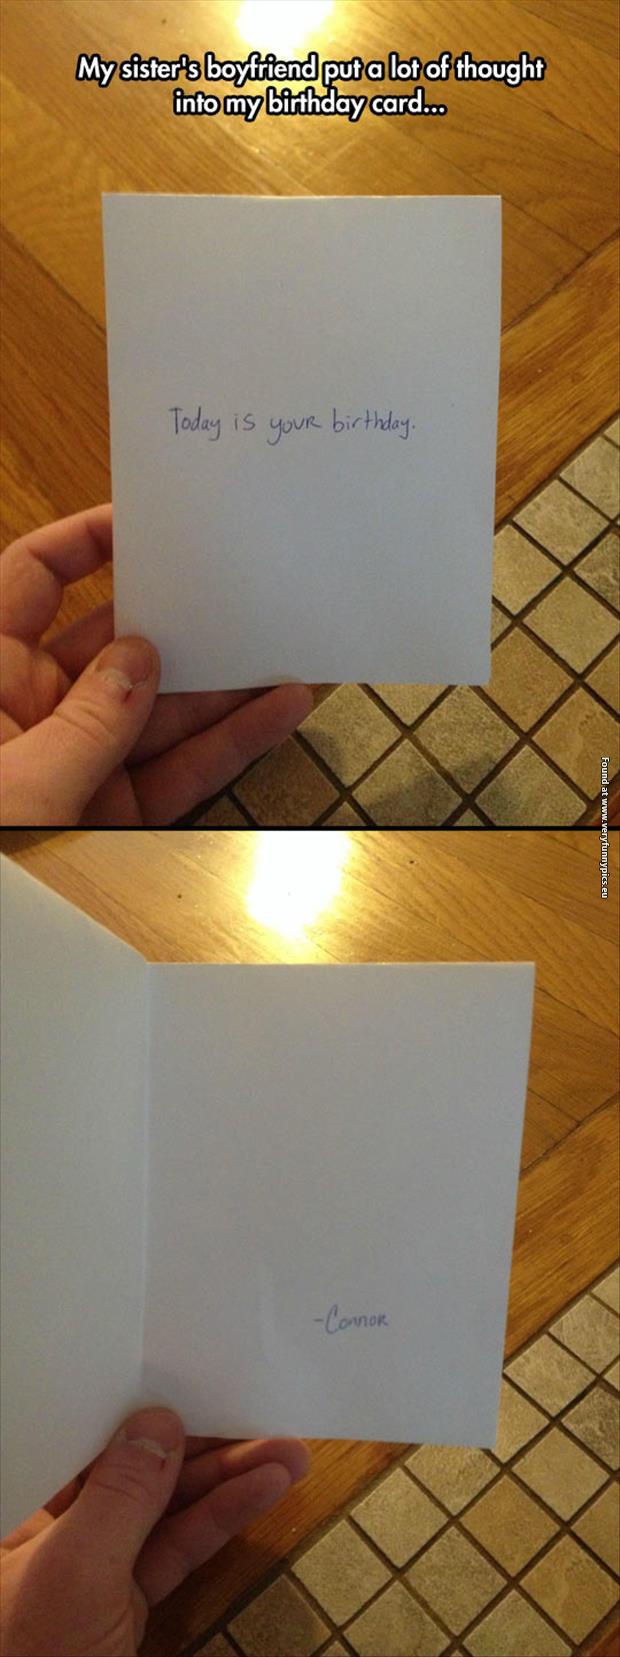 funny pictures worst birthday card